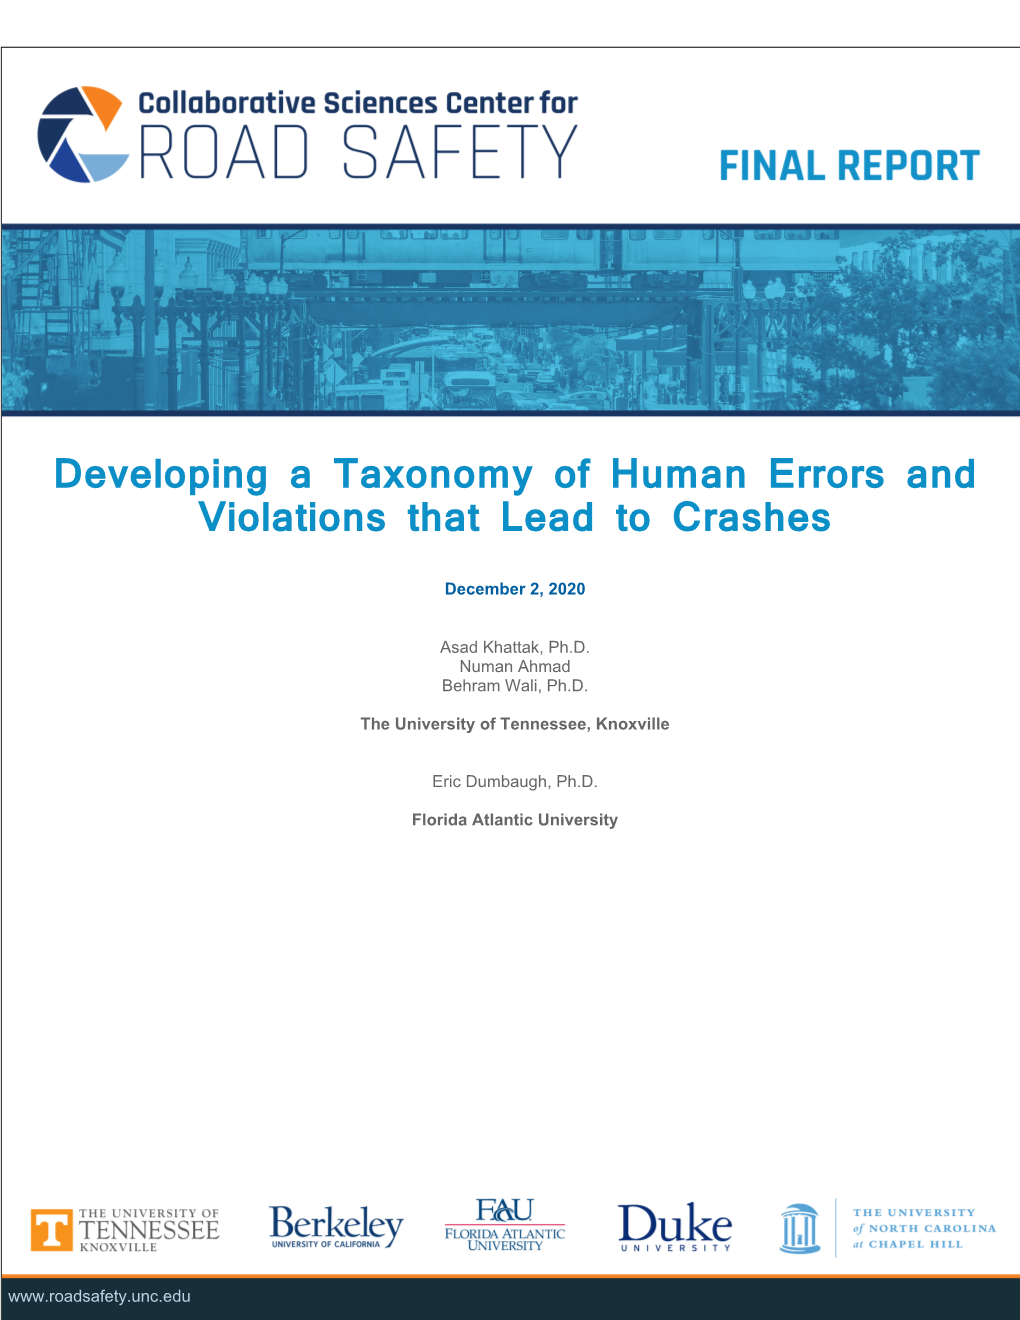 Developing a Taxonomy of Human Errors and Violations That Lead to Crashes